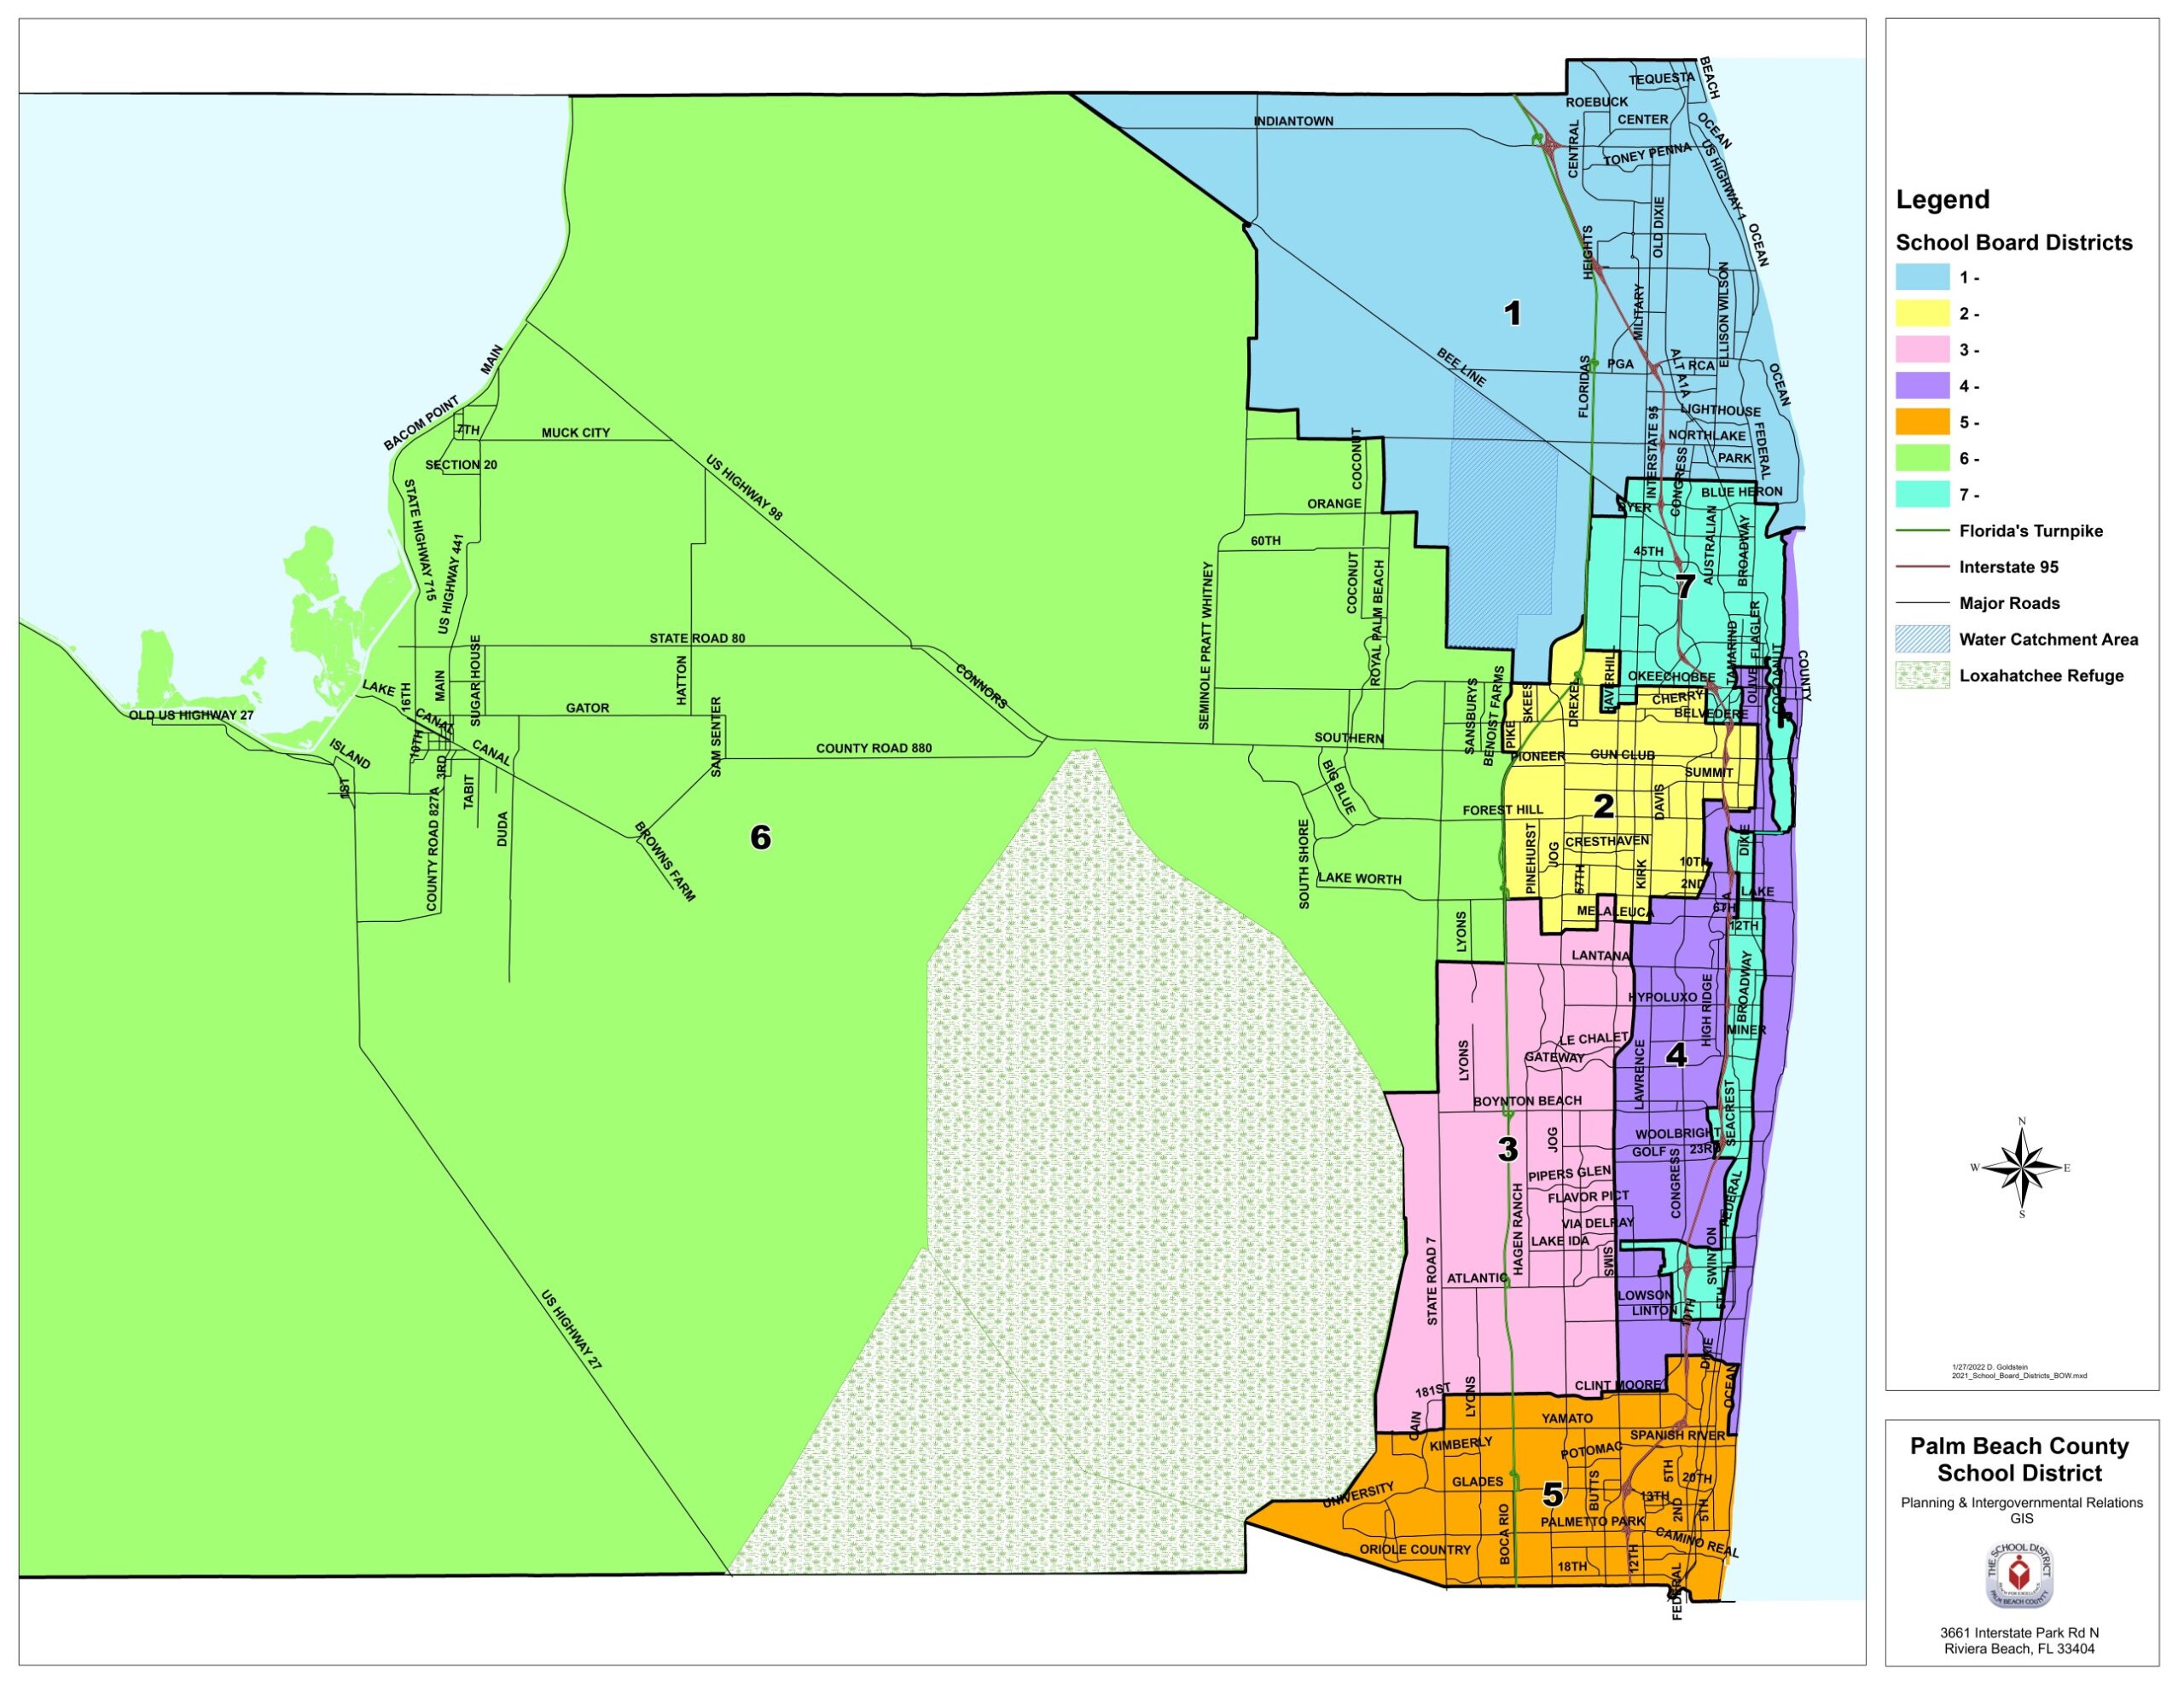 Map of Palm Beach County School Board Districts - <a href="https://cdn5-ss14.sharpschool.com/UserFiles/Servers/Server_270532/File/School%20Board/2021_School_Board_Districts_BOW.pdf" target="_blank">Click here for printable PDF source</a> (it will be opened in a new tab)